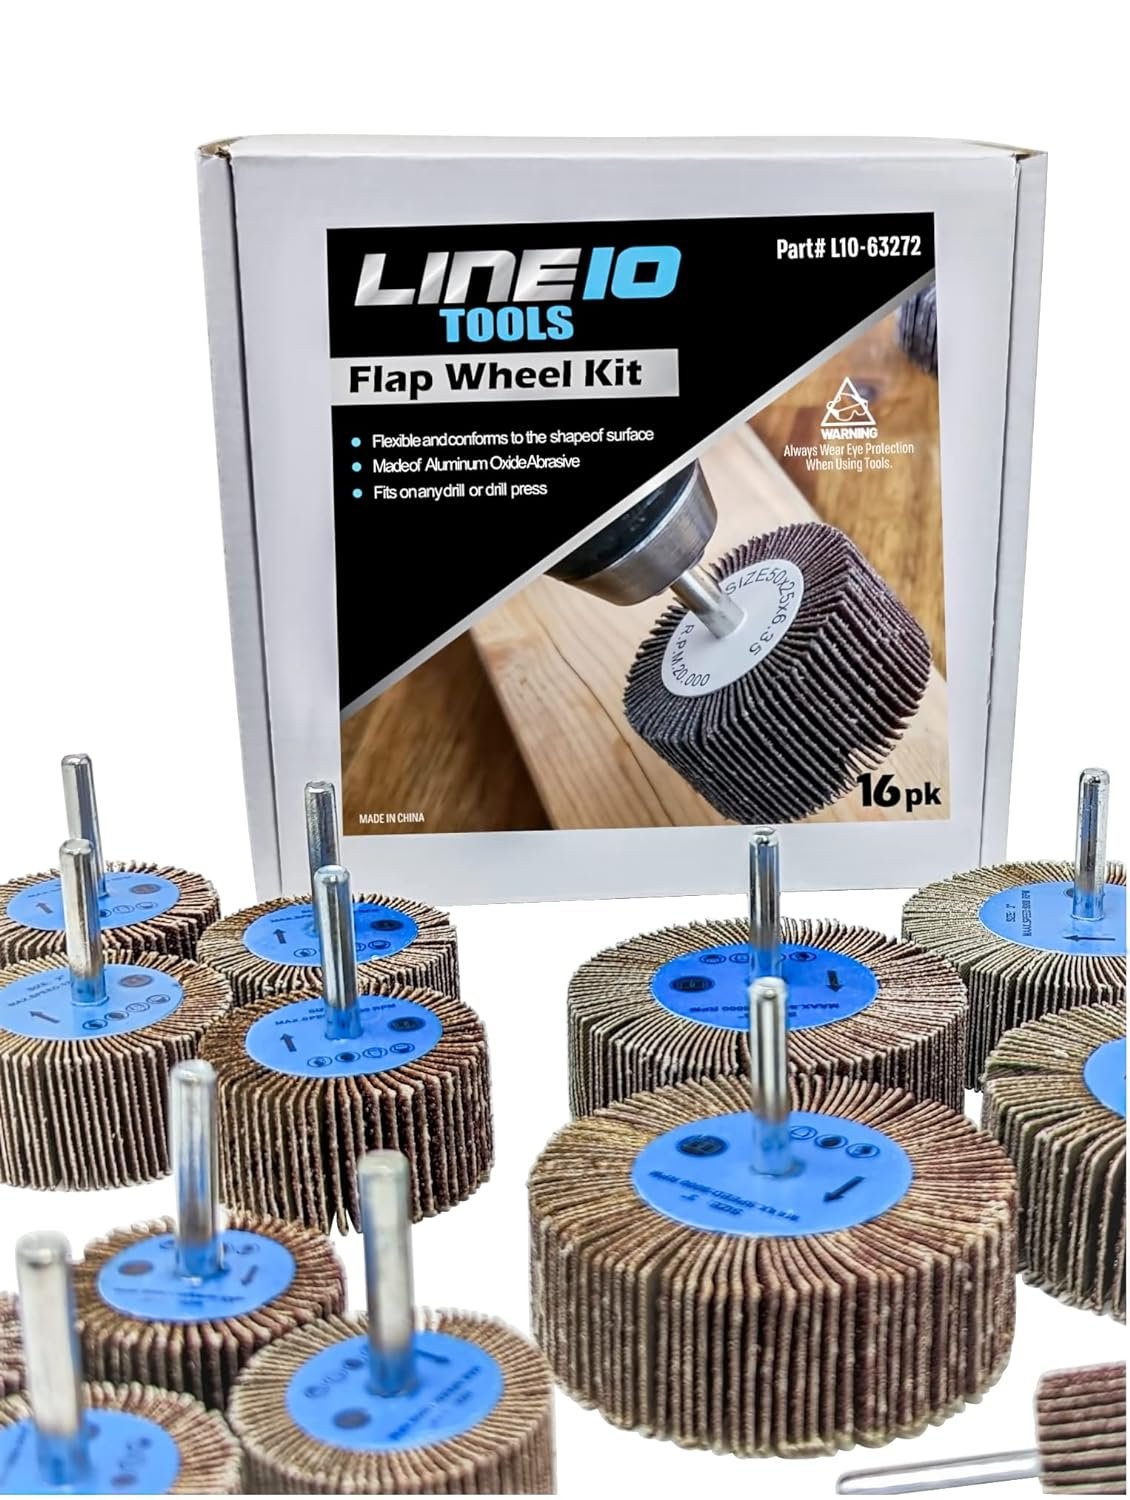 LINE10 Tools 16pk Flap Sanding Wheels Kit fits Drill and Die Grinder for Wood and Metal